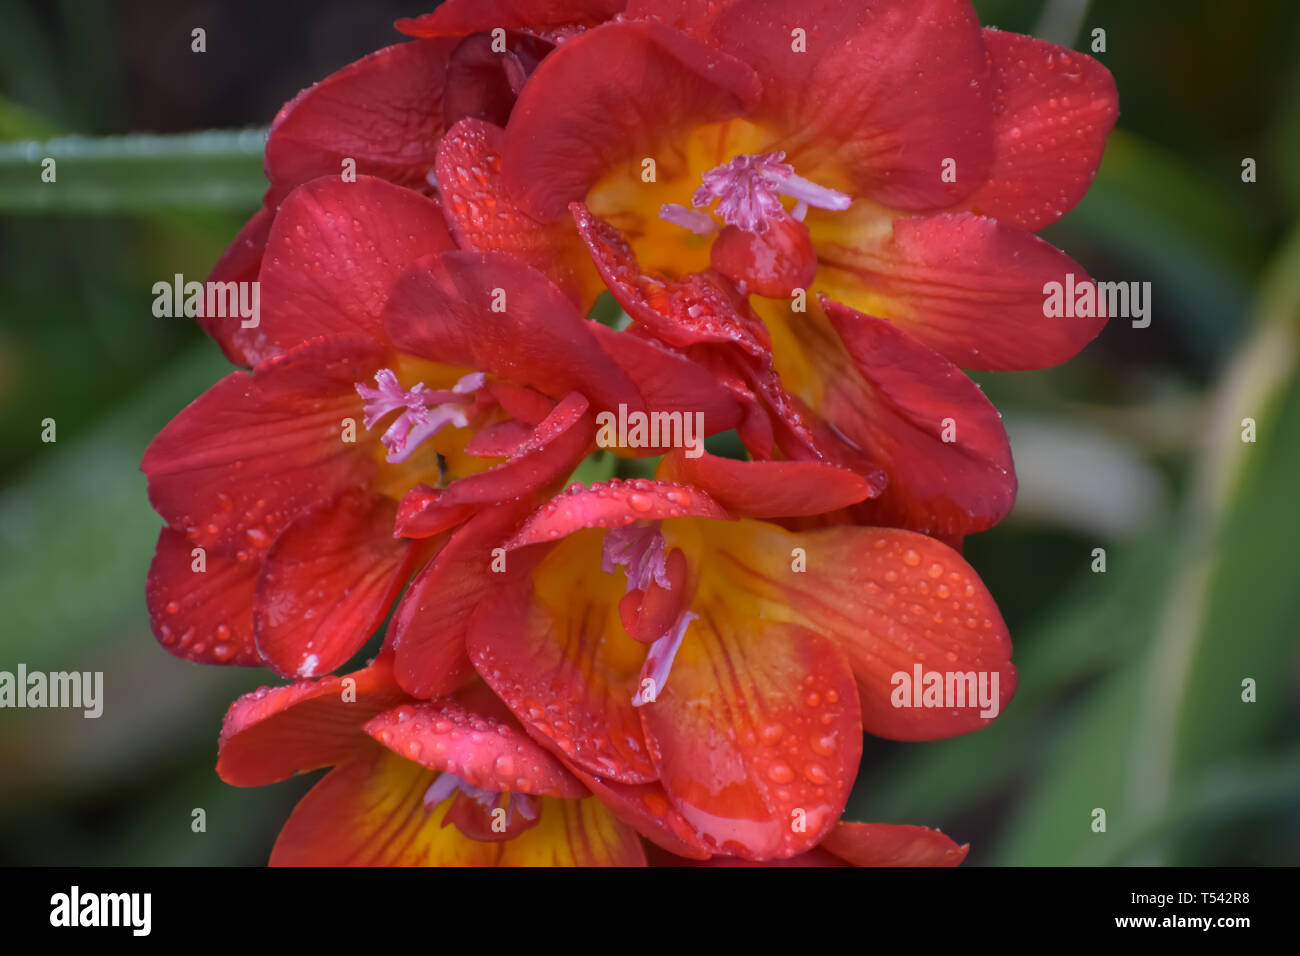 Closeup of the red and yellow blossoms of freesia flower wet with droplet of spring rain. Stock Photo